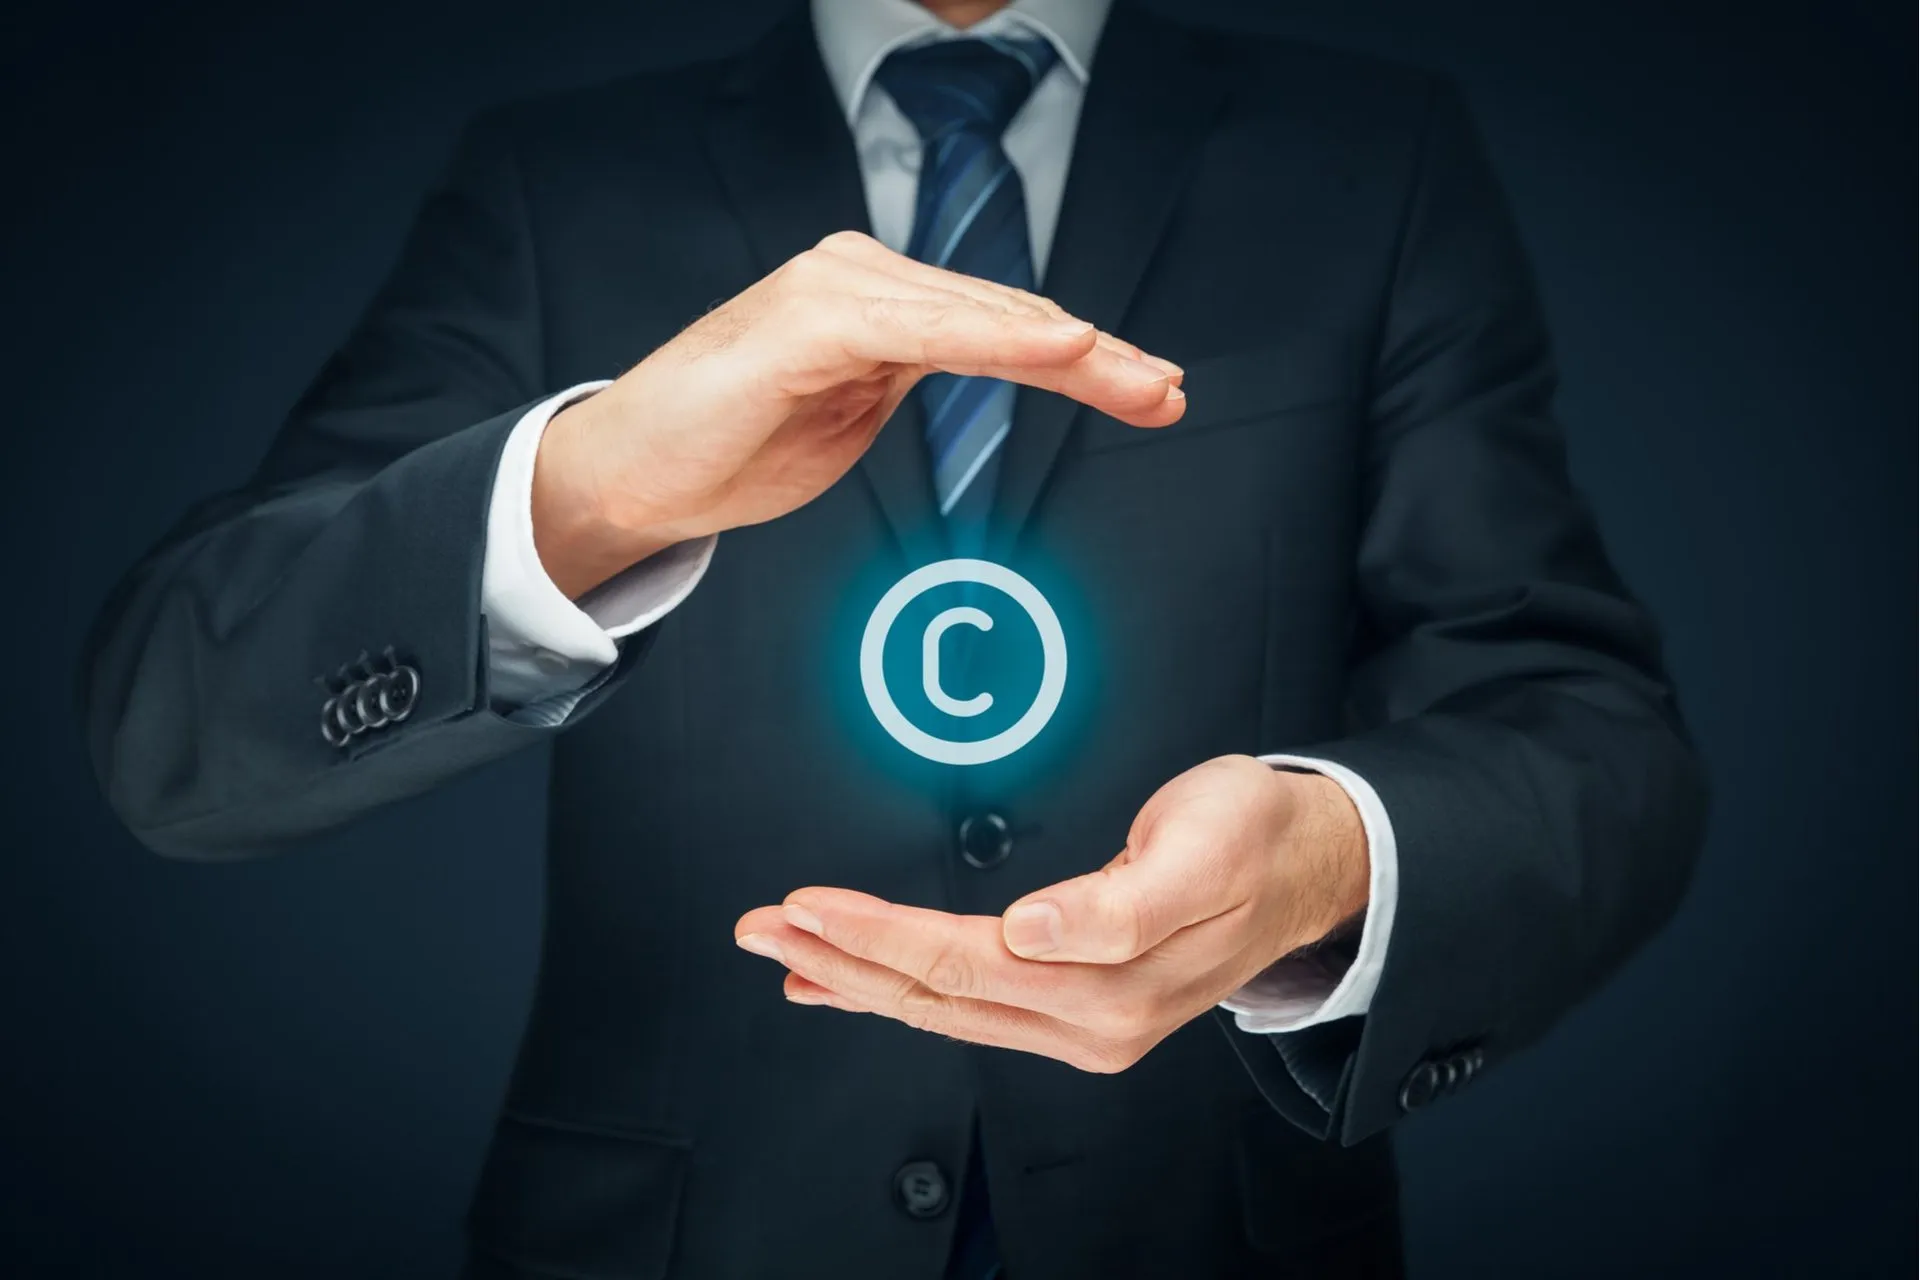 What Does a Copyright Mean, and What Are the Different Types?